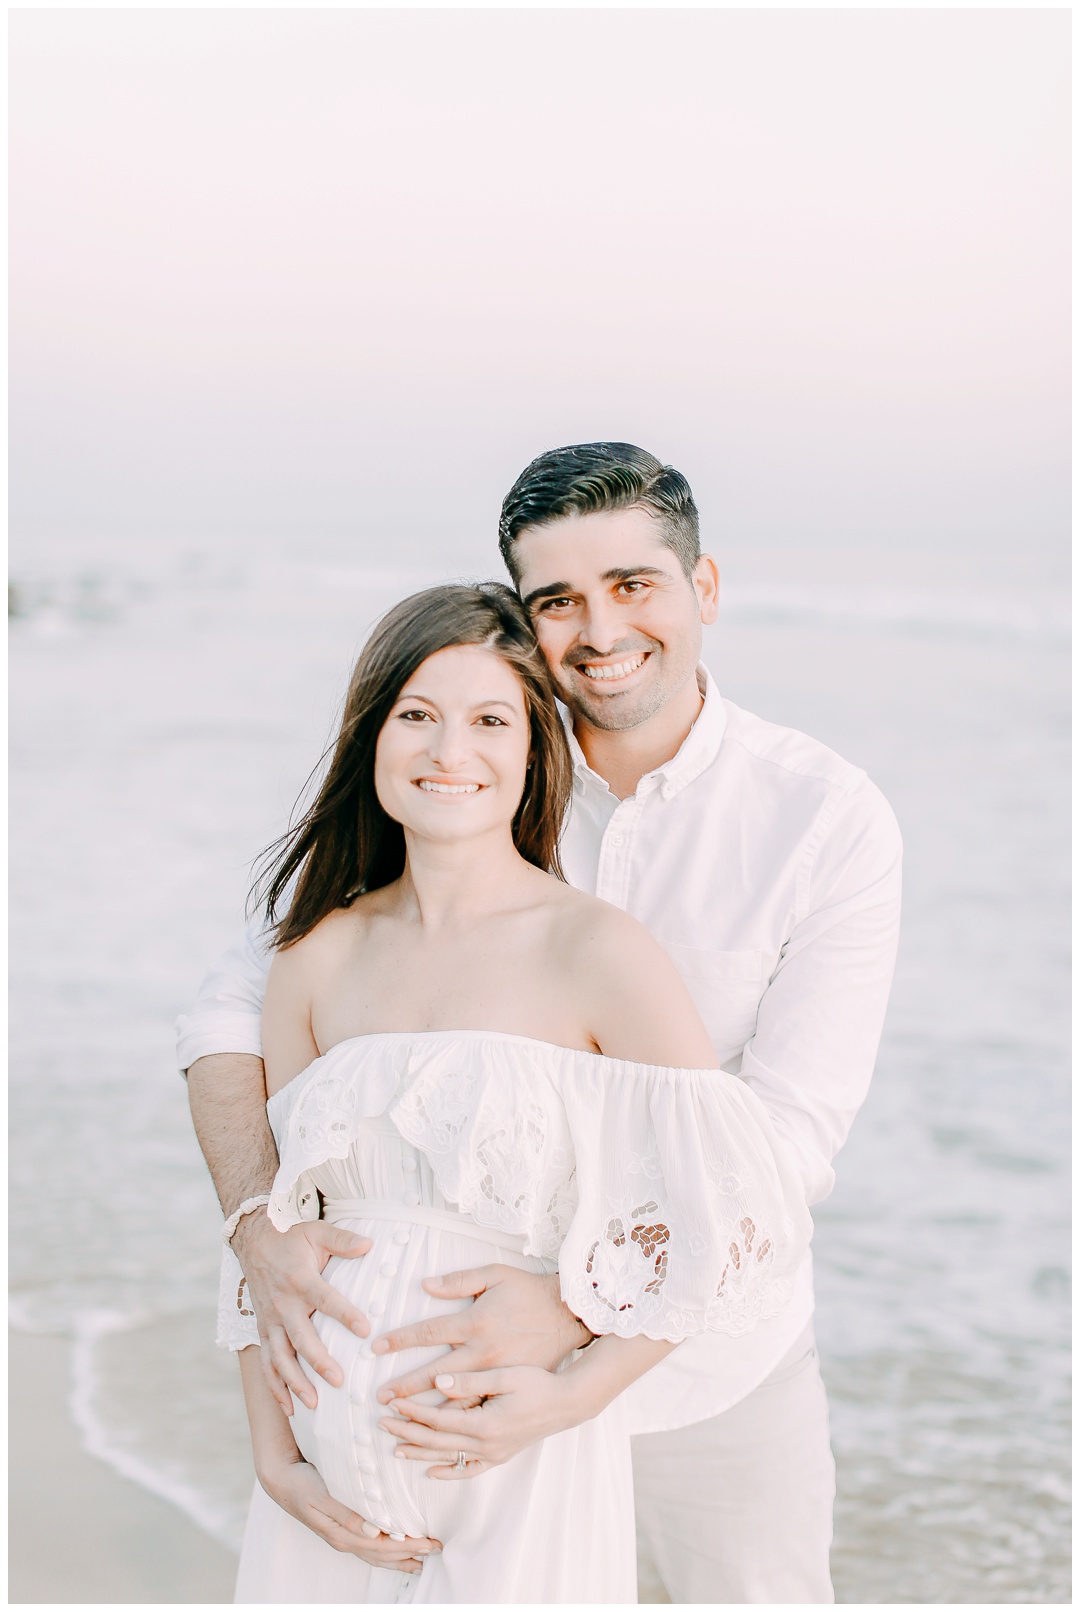 Crystal-Cove-State-Beach-Maternity-Session-Crystal-Cove-Newport-Beach-Maternity-Photographer-Crystal-Cove-Session-Cori-Kleckner-Photography-Orange-County-Maternity-Family-Photos-Session-_0890.jpg